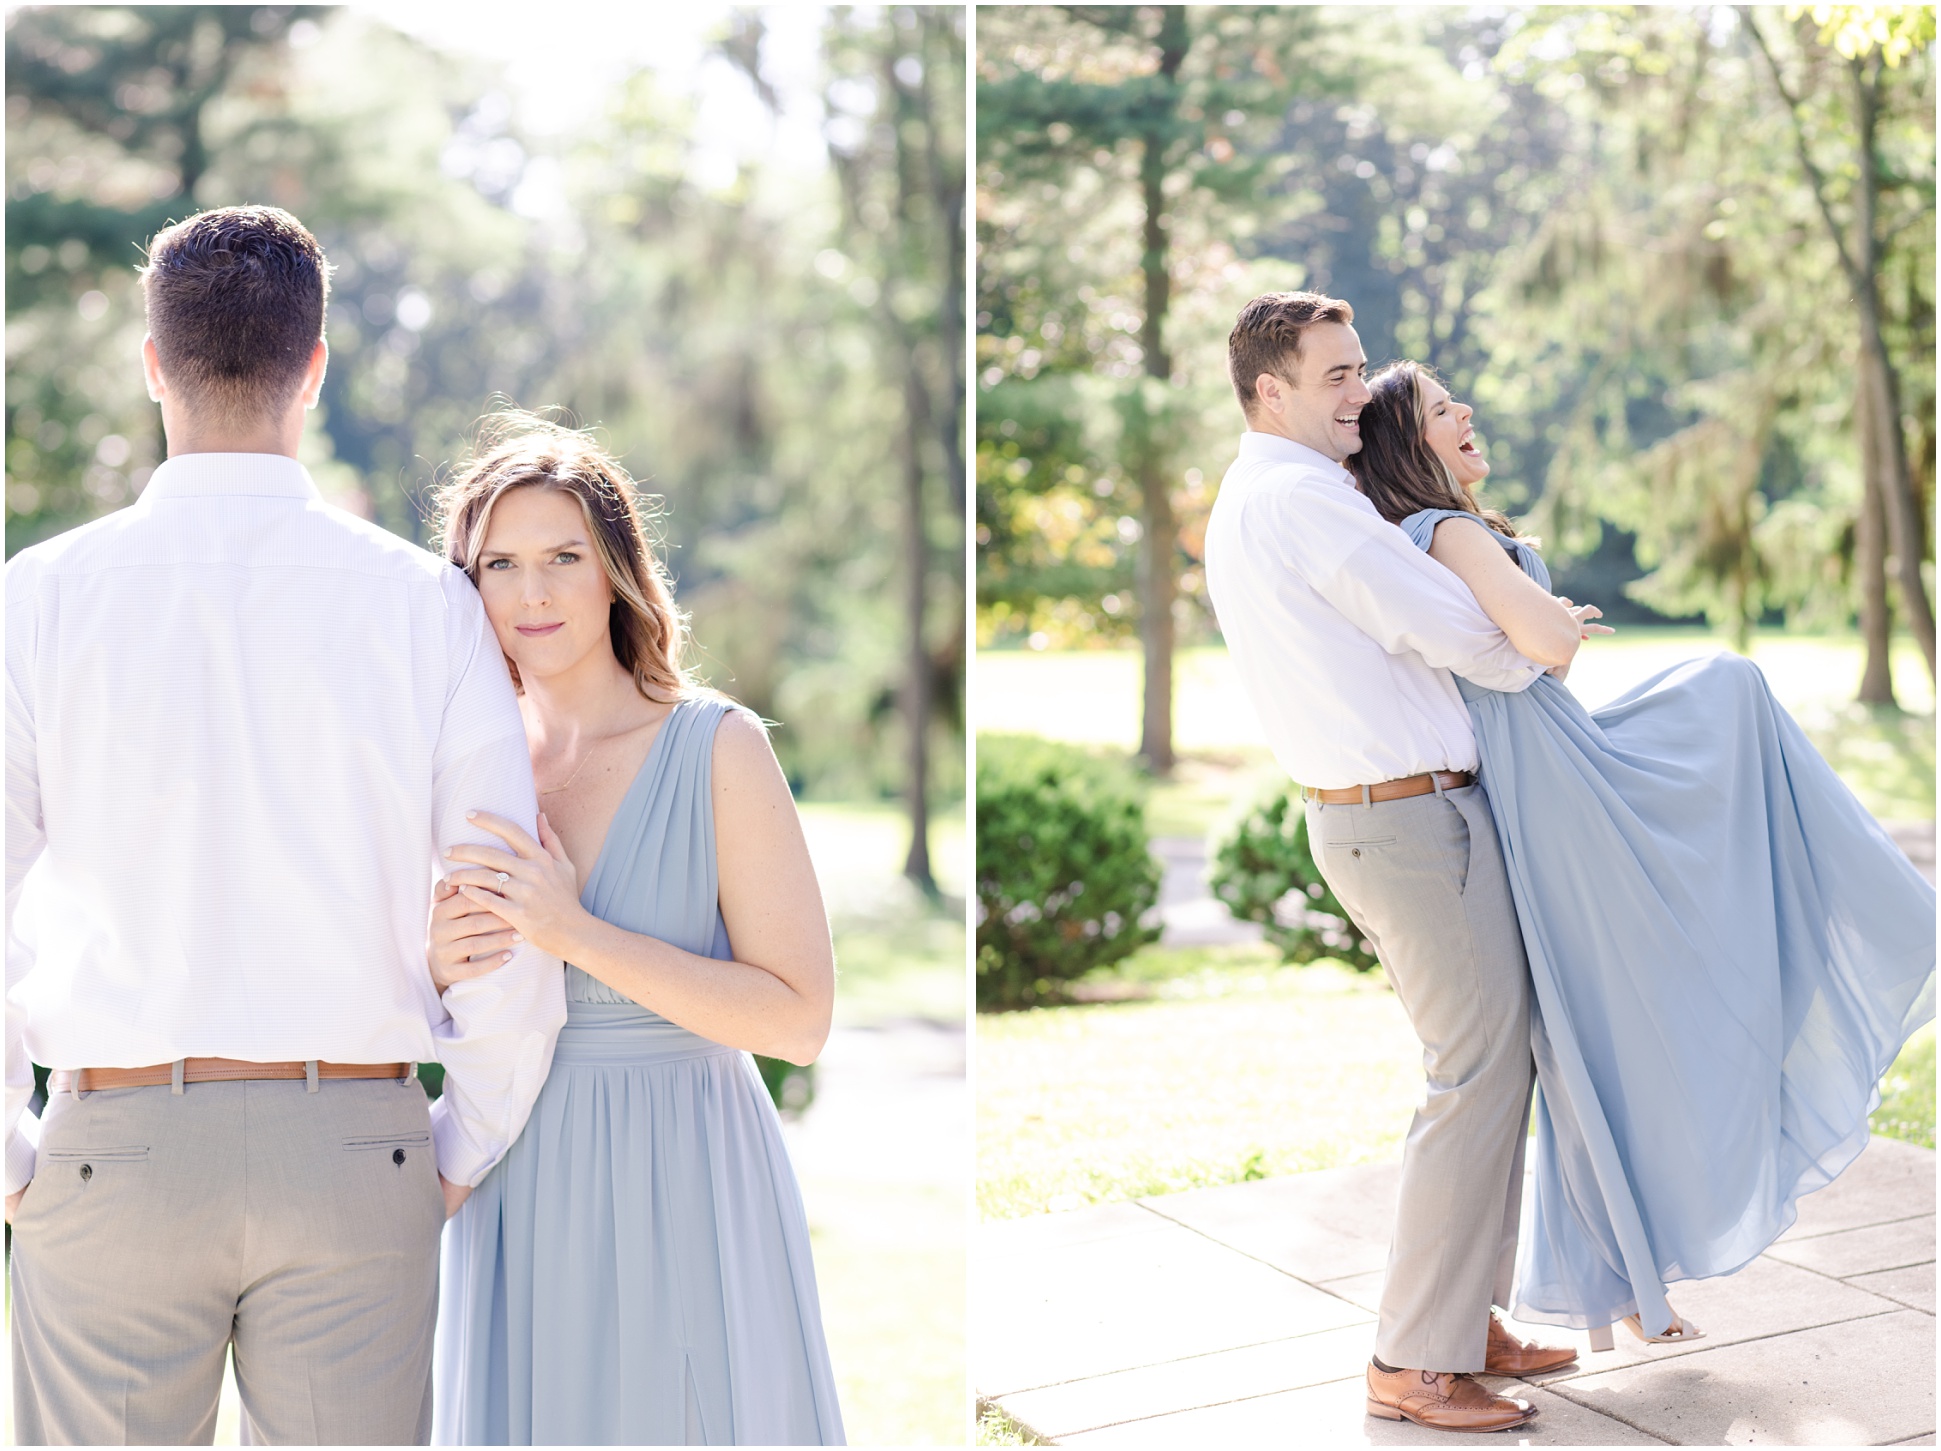 Two images of Angela and Jeff during their Liriodendron Engagement Session